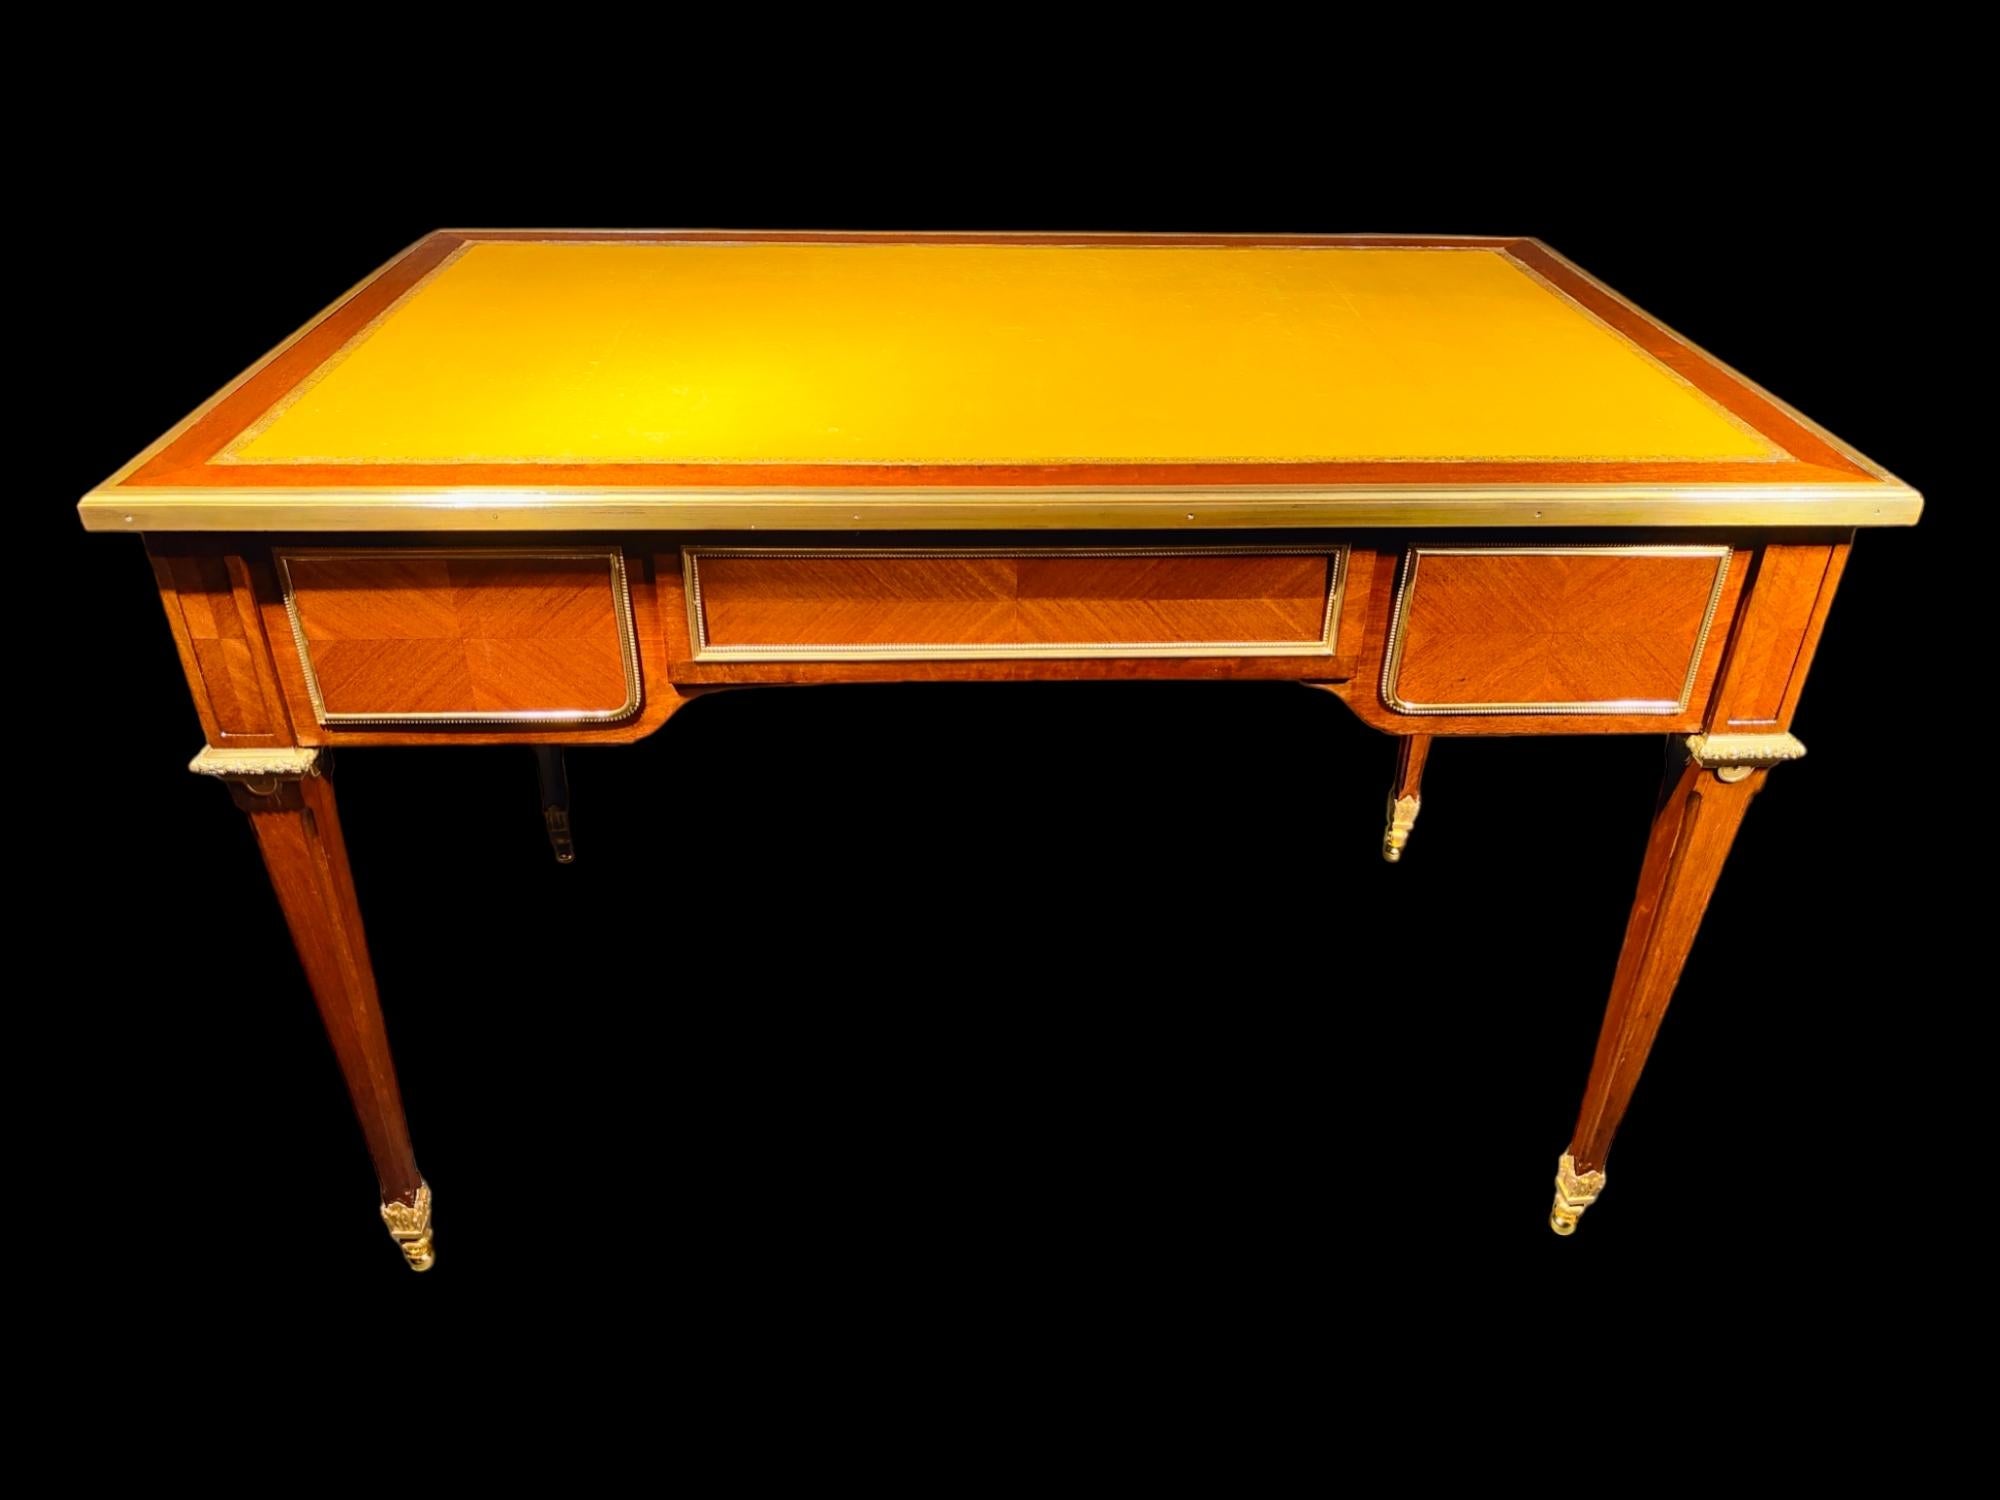 Very Fine Gilt Bronze Mounted Tulipwood and Amaranth Desk by L. Cueunieres For Sale 9